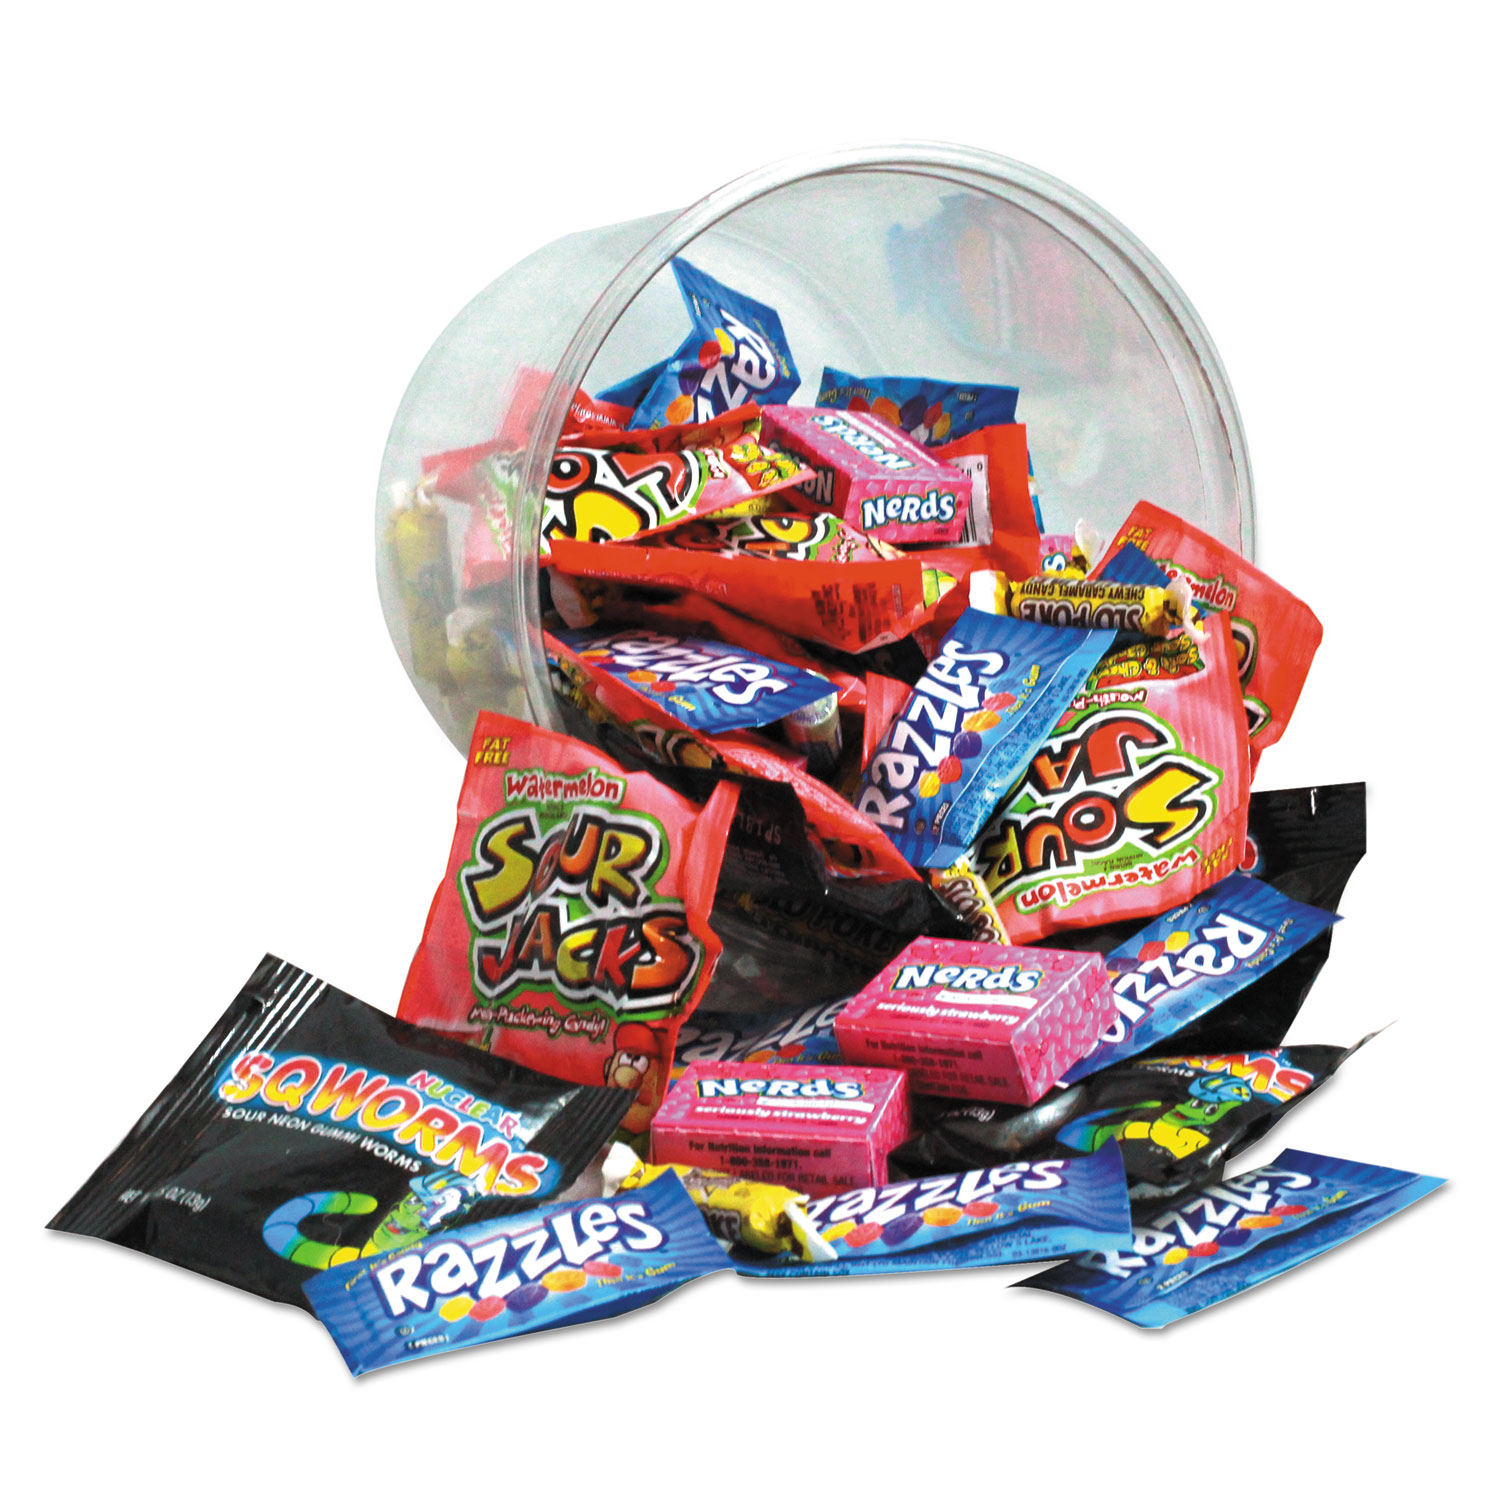 Candy Tubs, Generations Mix, Individually Wrapped, 16 oz Resealable Plastic Tub